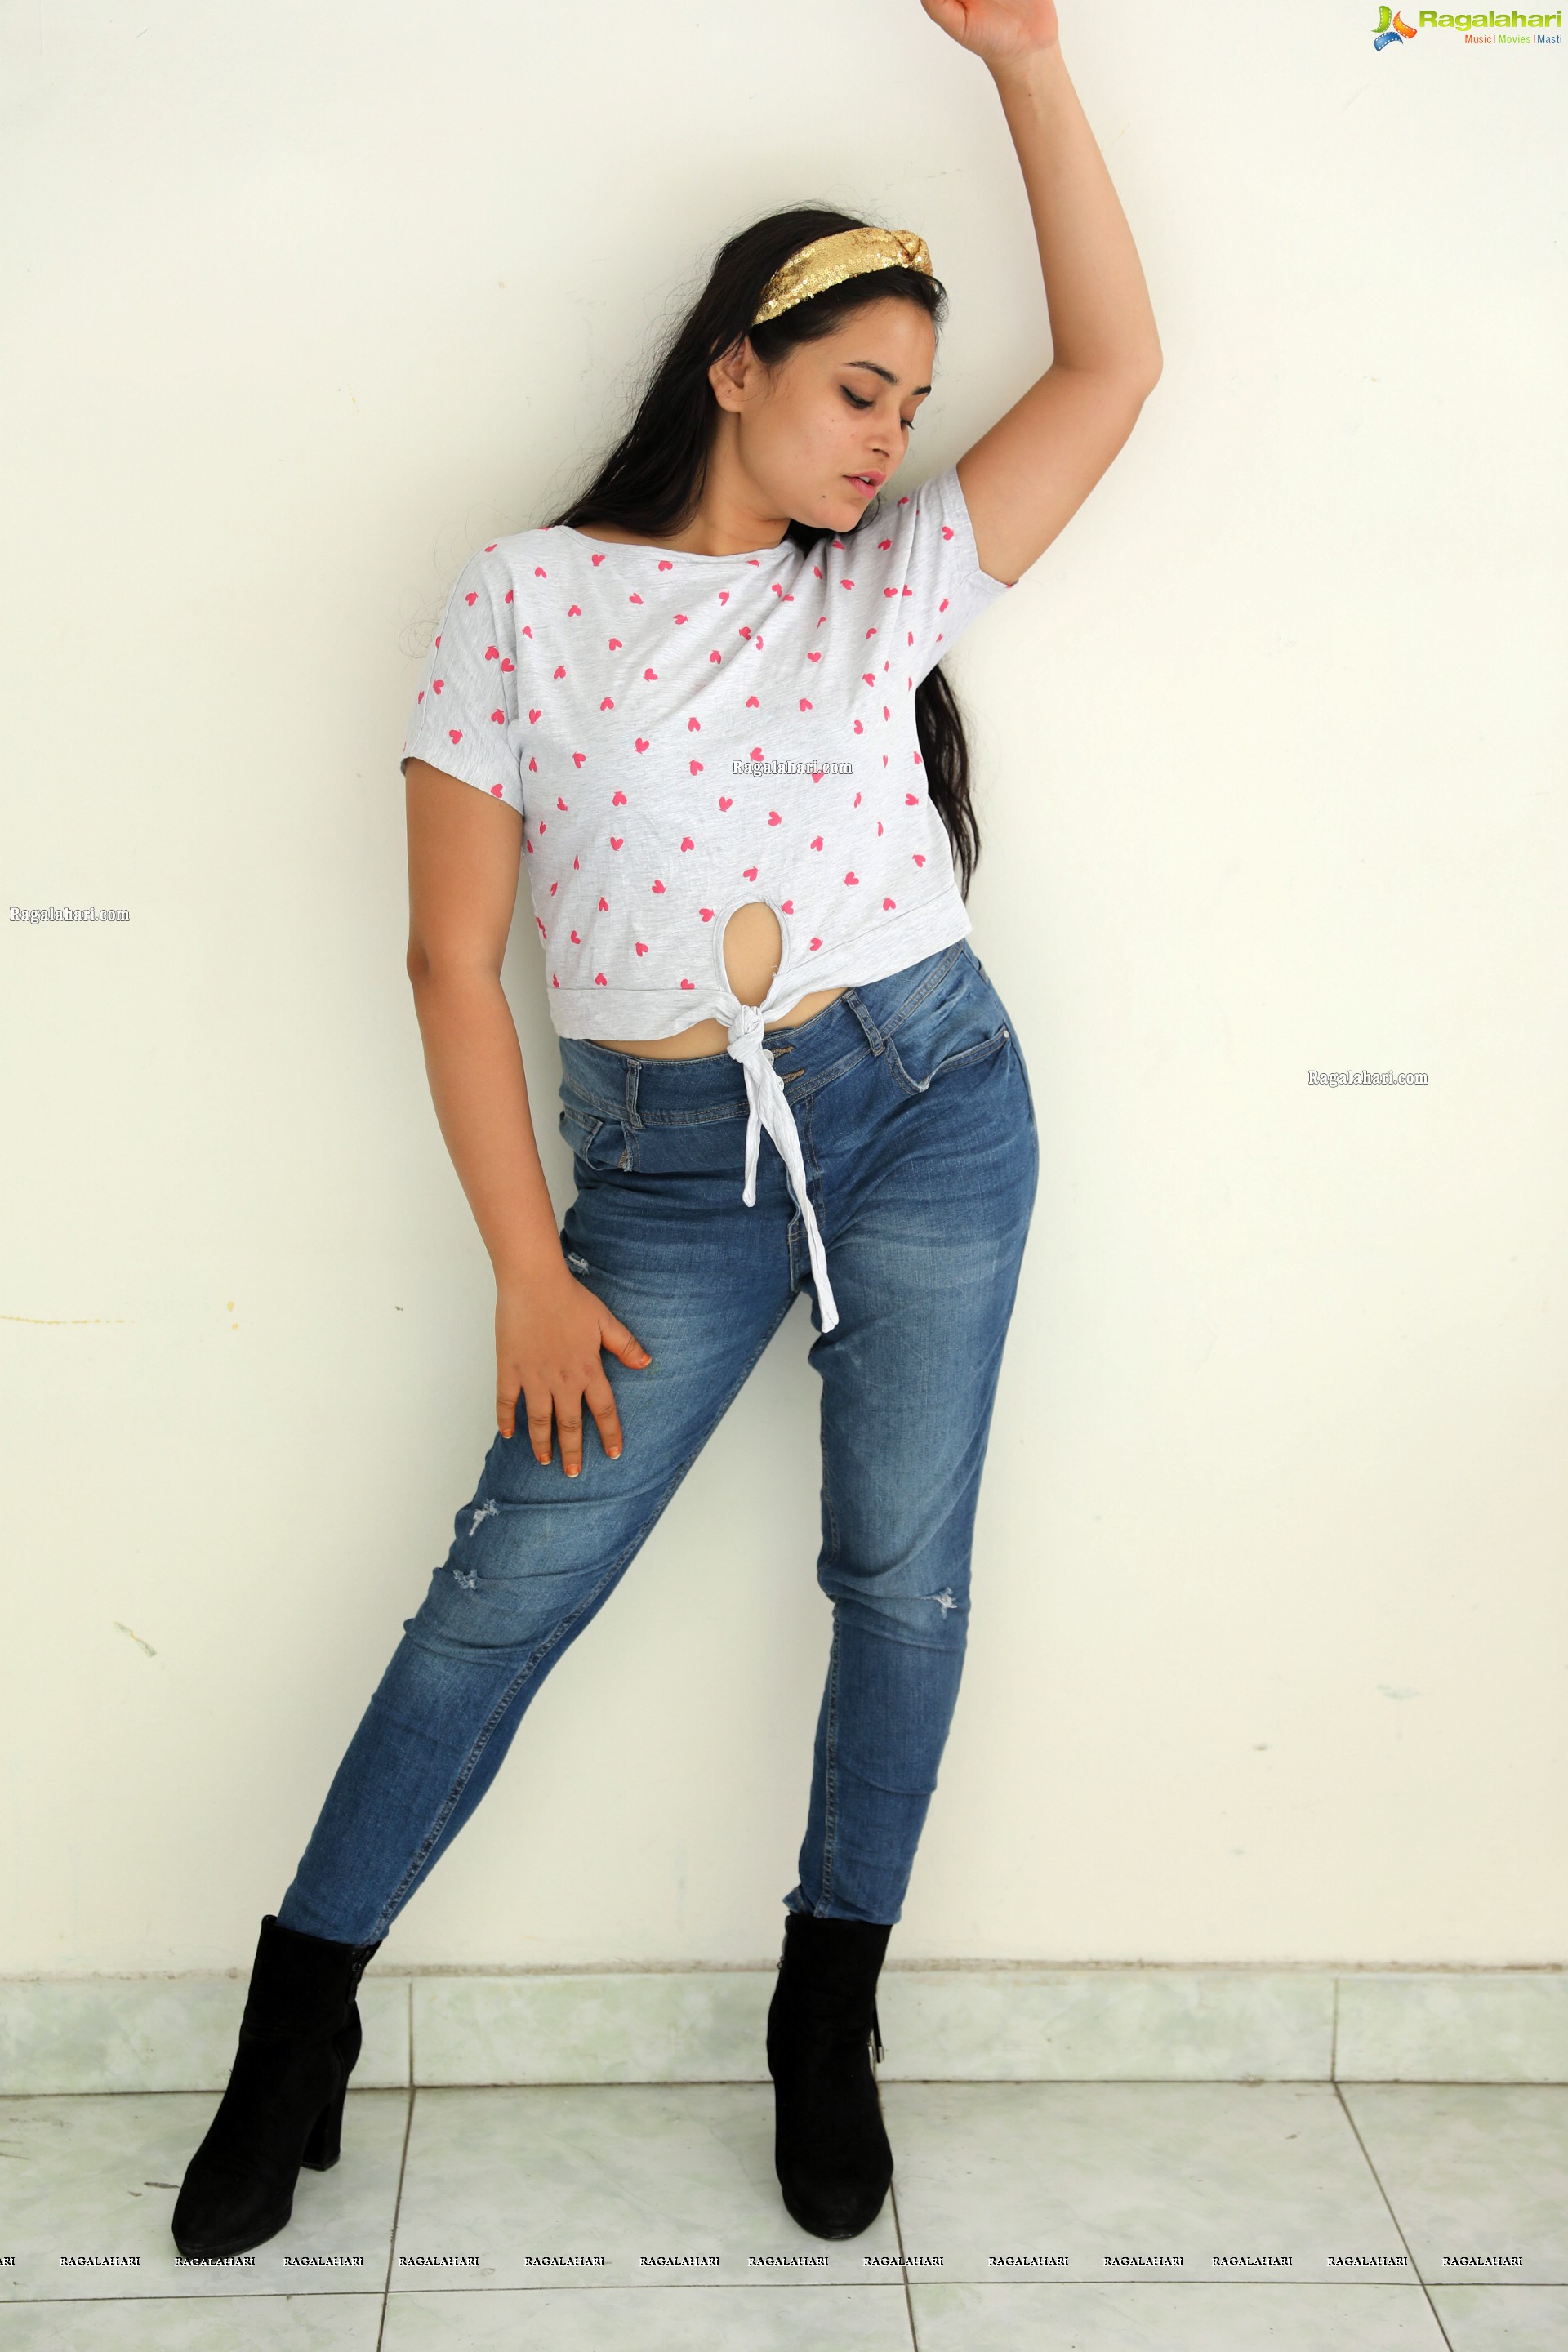 Vaanya Aggarwal in White Top and Jeans, HD Photo Gallery